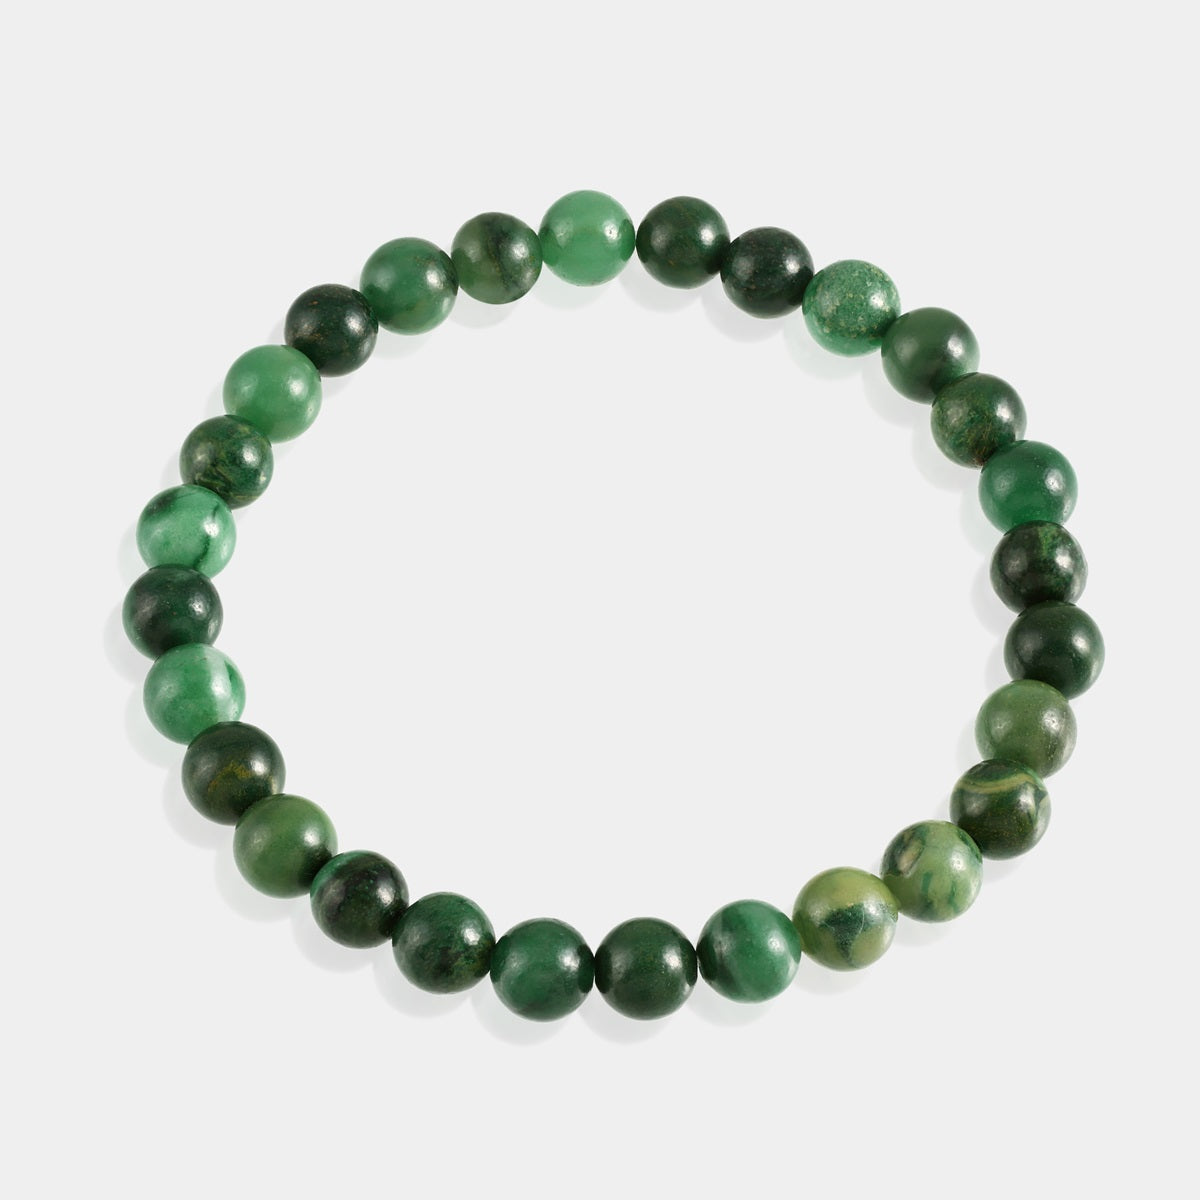 Symbolic image representing emotional balance linked to Jade, soothing the mind and promoting calmness in the Jade Stretch Bracelet